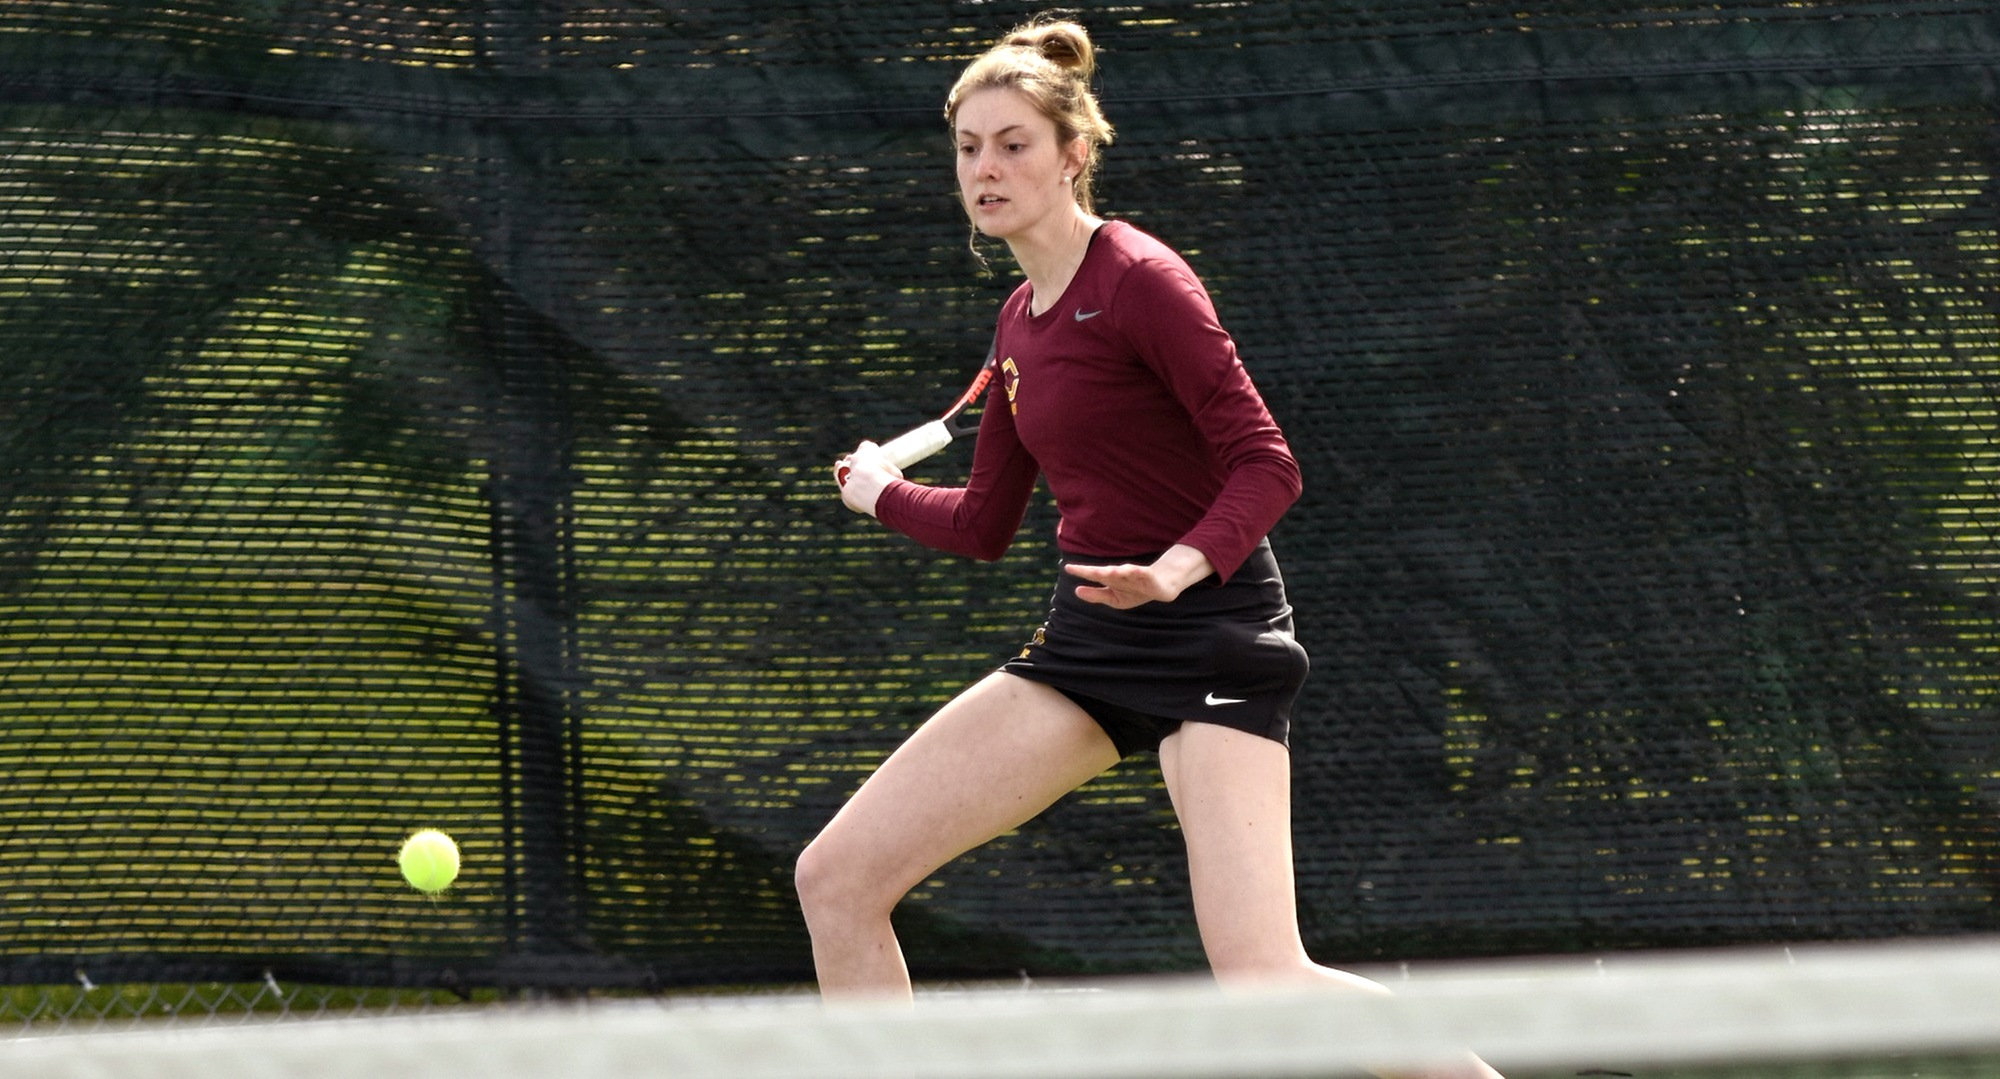 Junior Jenna Forknell lost her first set in singles play in Florida but then rallied to win in the super tie-breaker.